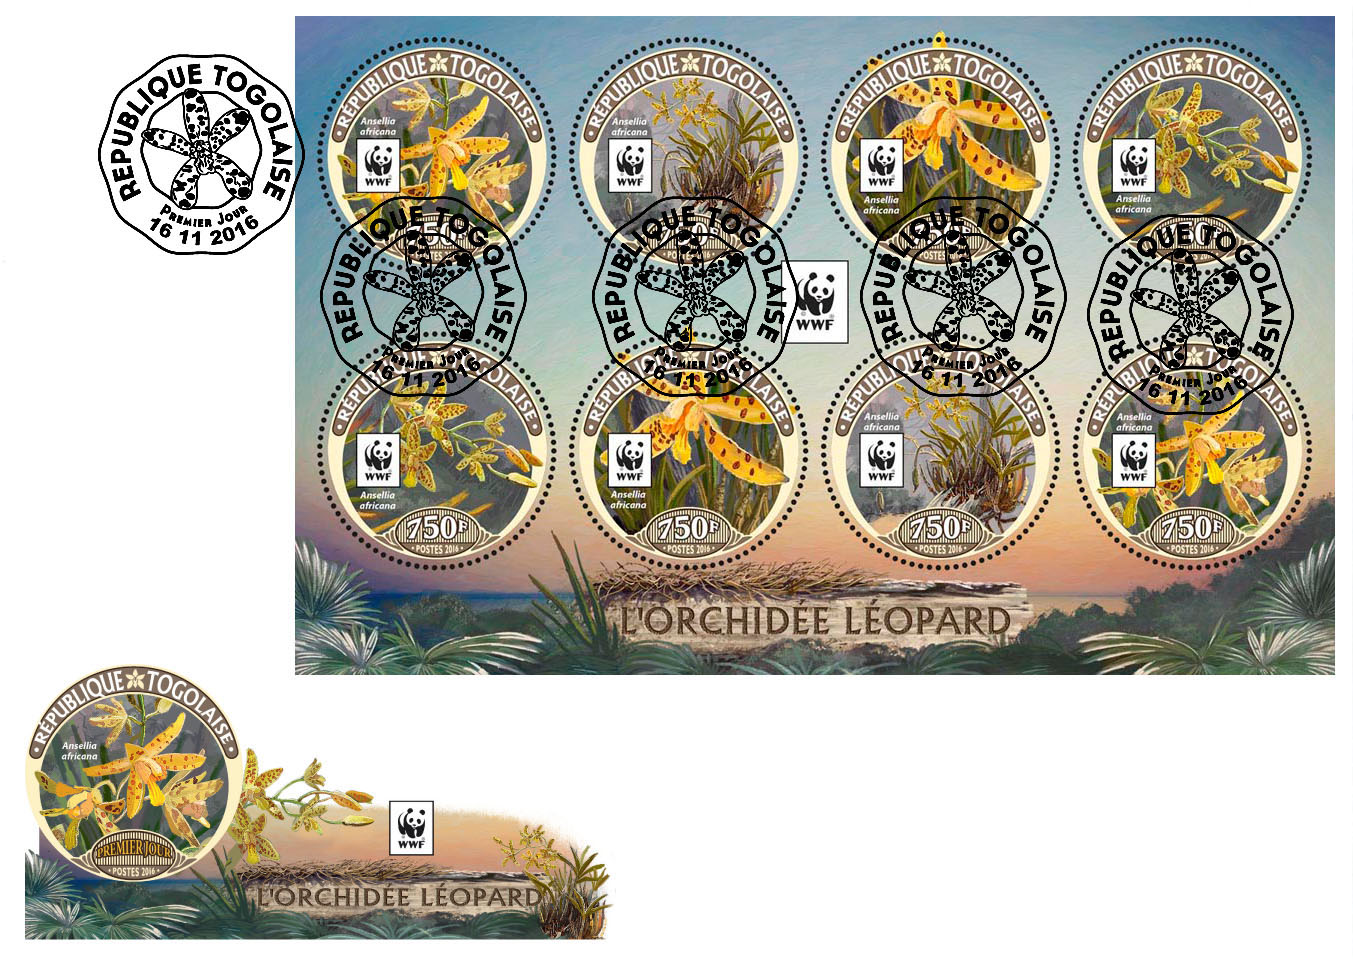 WWF – Orchids (FDC) - Issue of Togo postage stamps